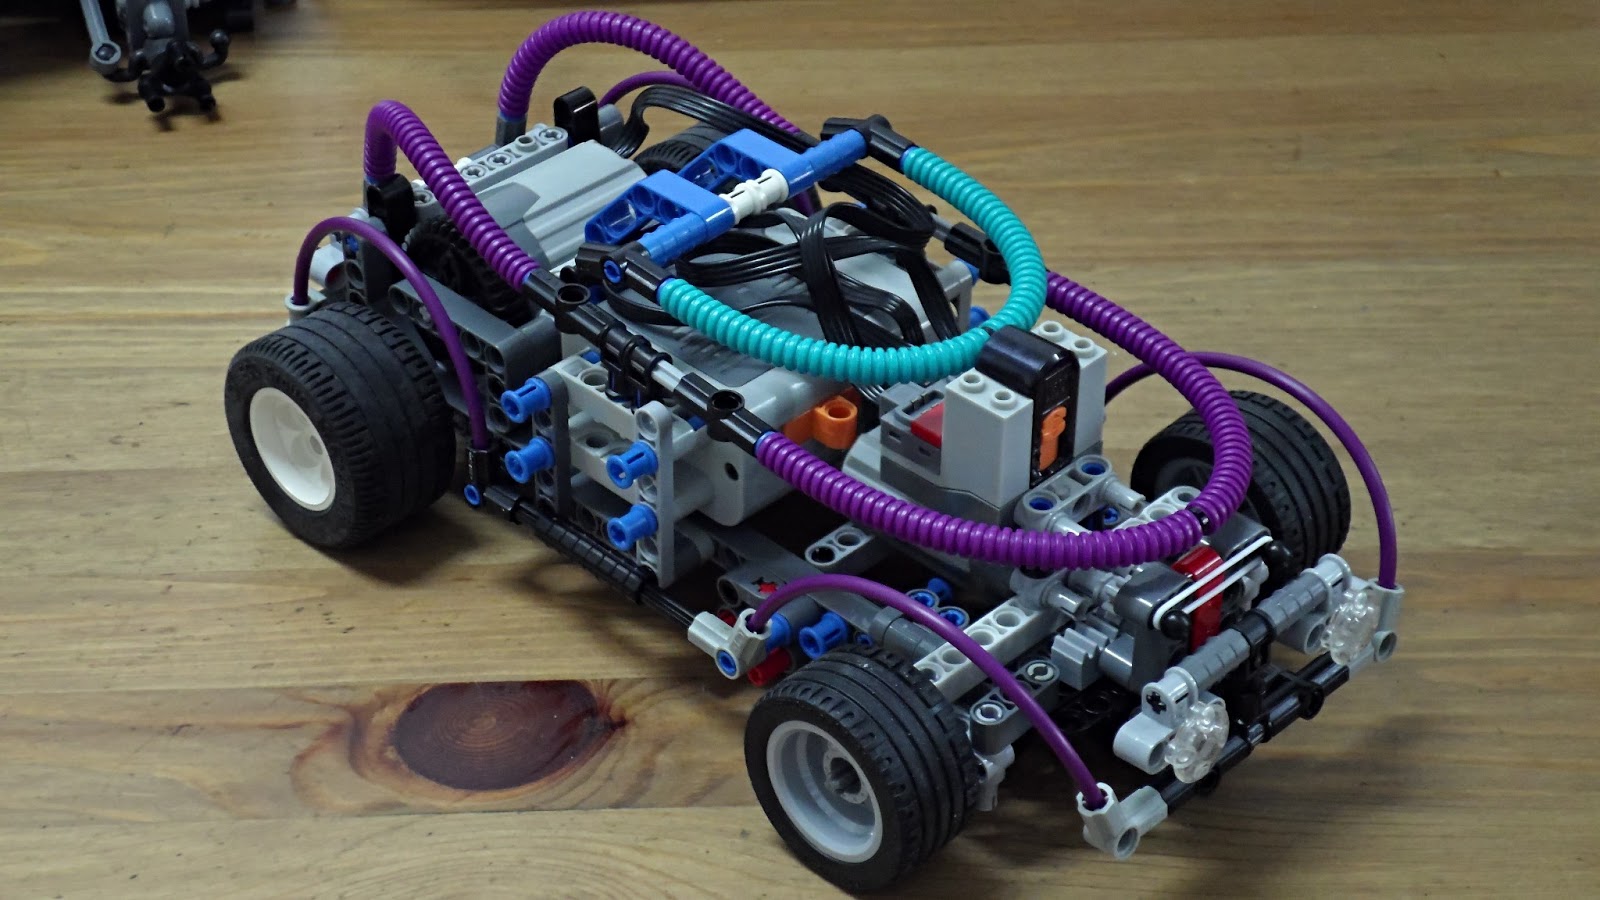 Lego Mindstorms and Technics Scene in Malaysia: Power Functions Car 